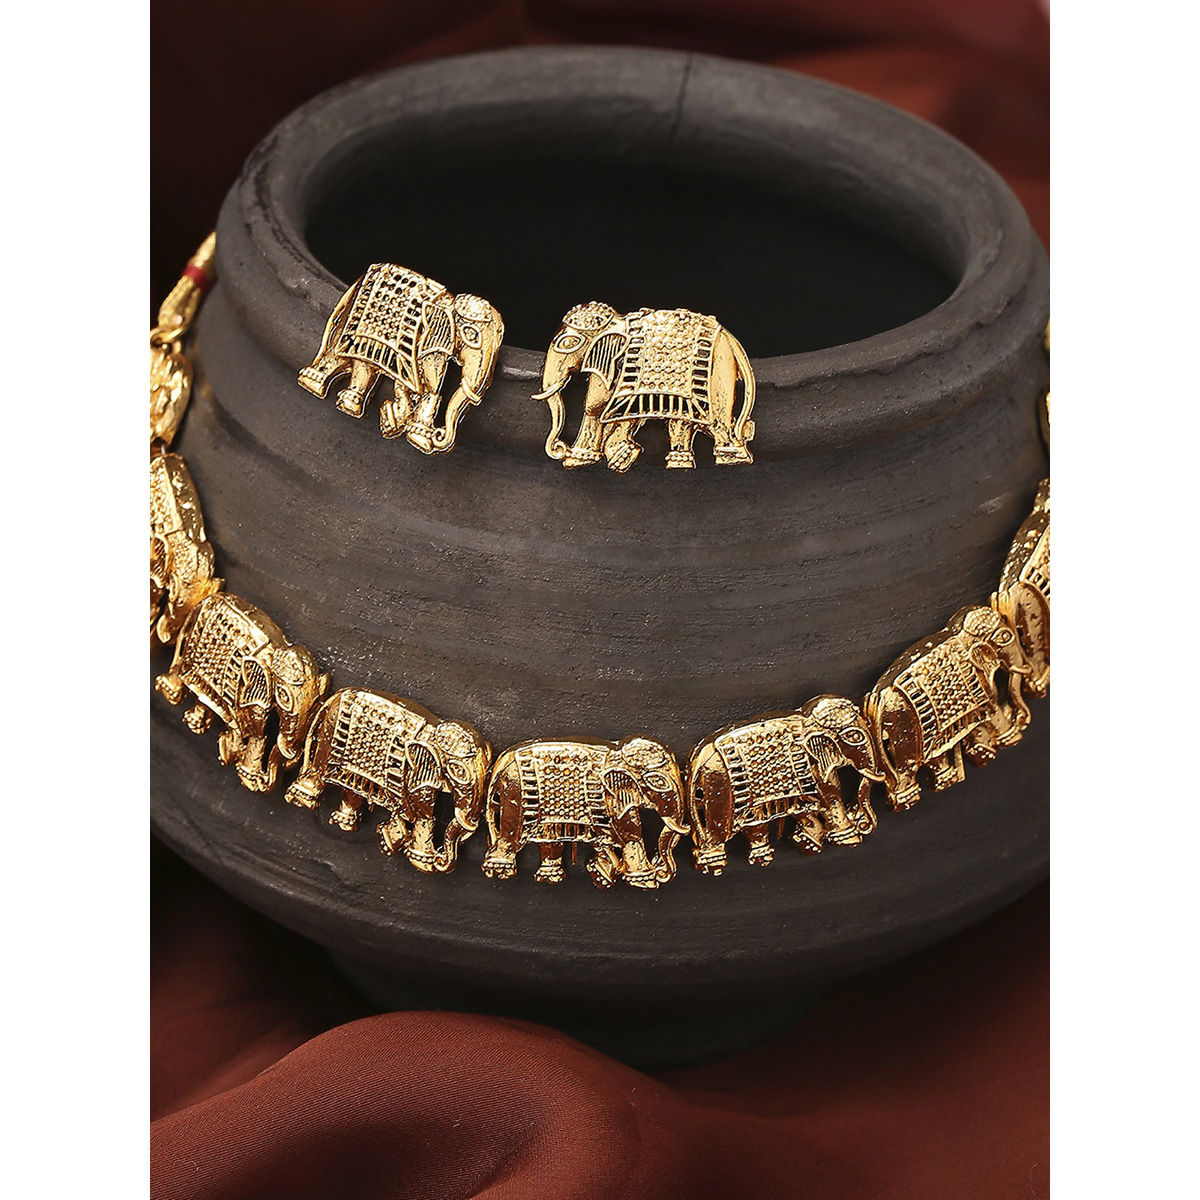 Discover 69+ elephant necklace and earring set latest